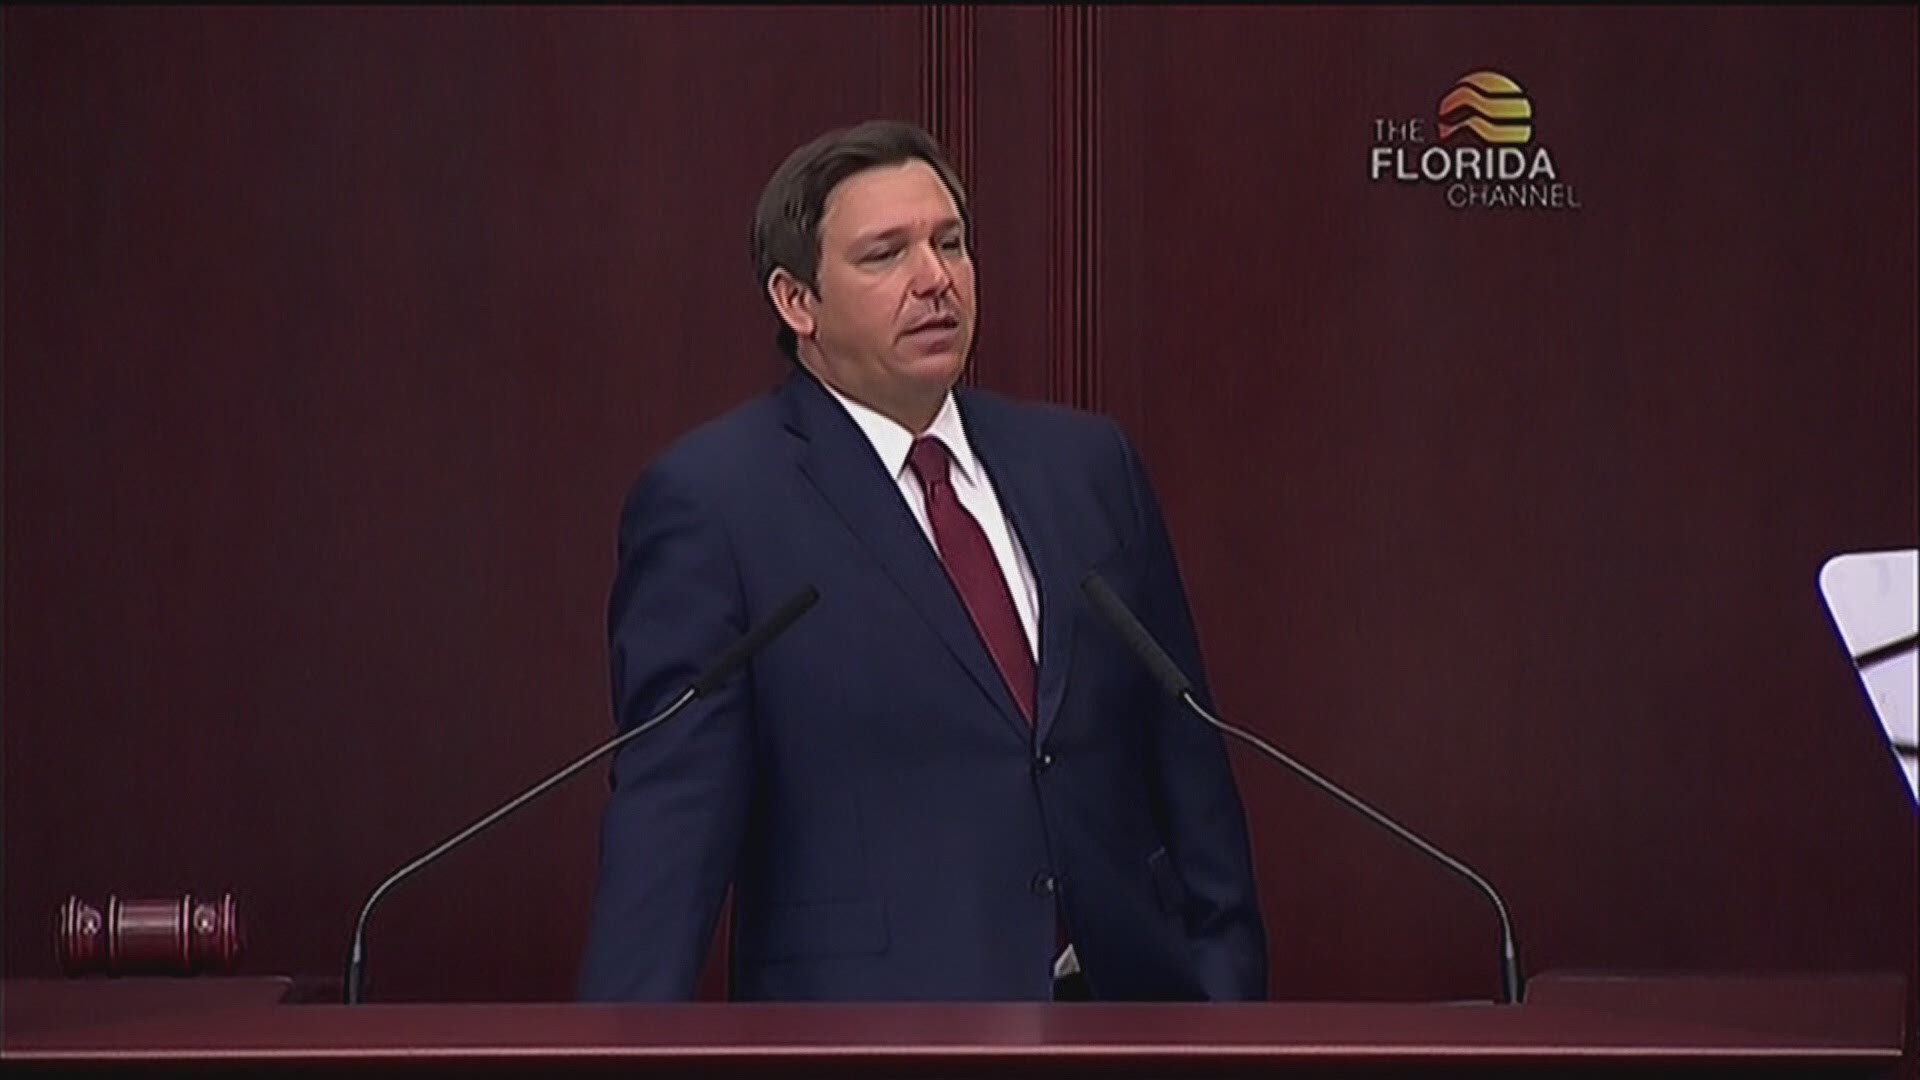 Fla. Gov. Ron DeSantis spotlights Angel Parents Kiyan and Bobby Michael, from Jacksonville. Their son was killed in a car crash involving an illegal immigrant back in 2007.